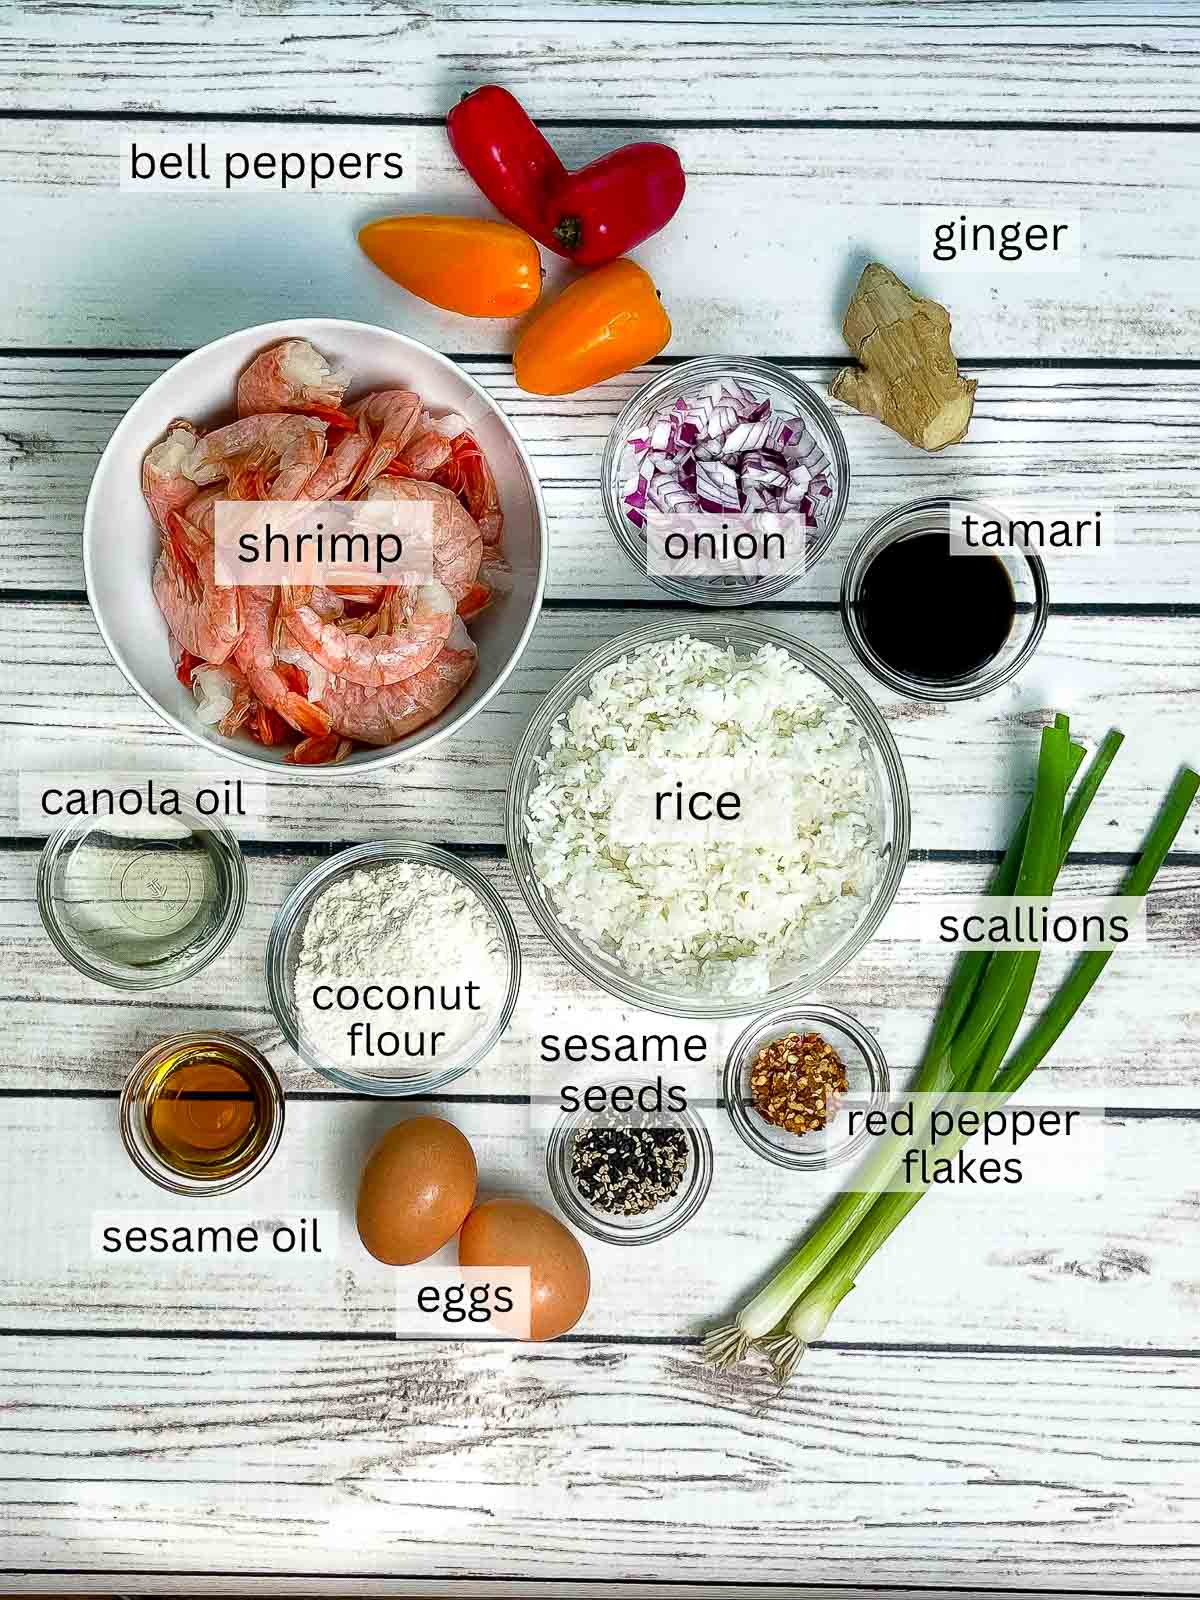 Ingredients in bowls on a white board for making shrimp fried rice cups.